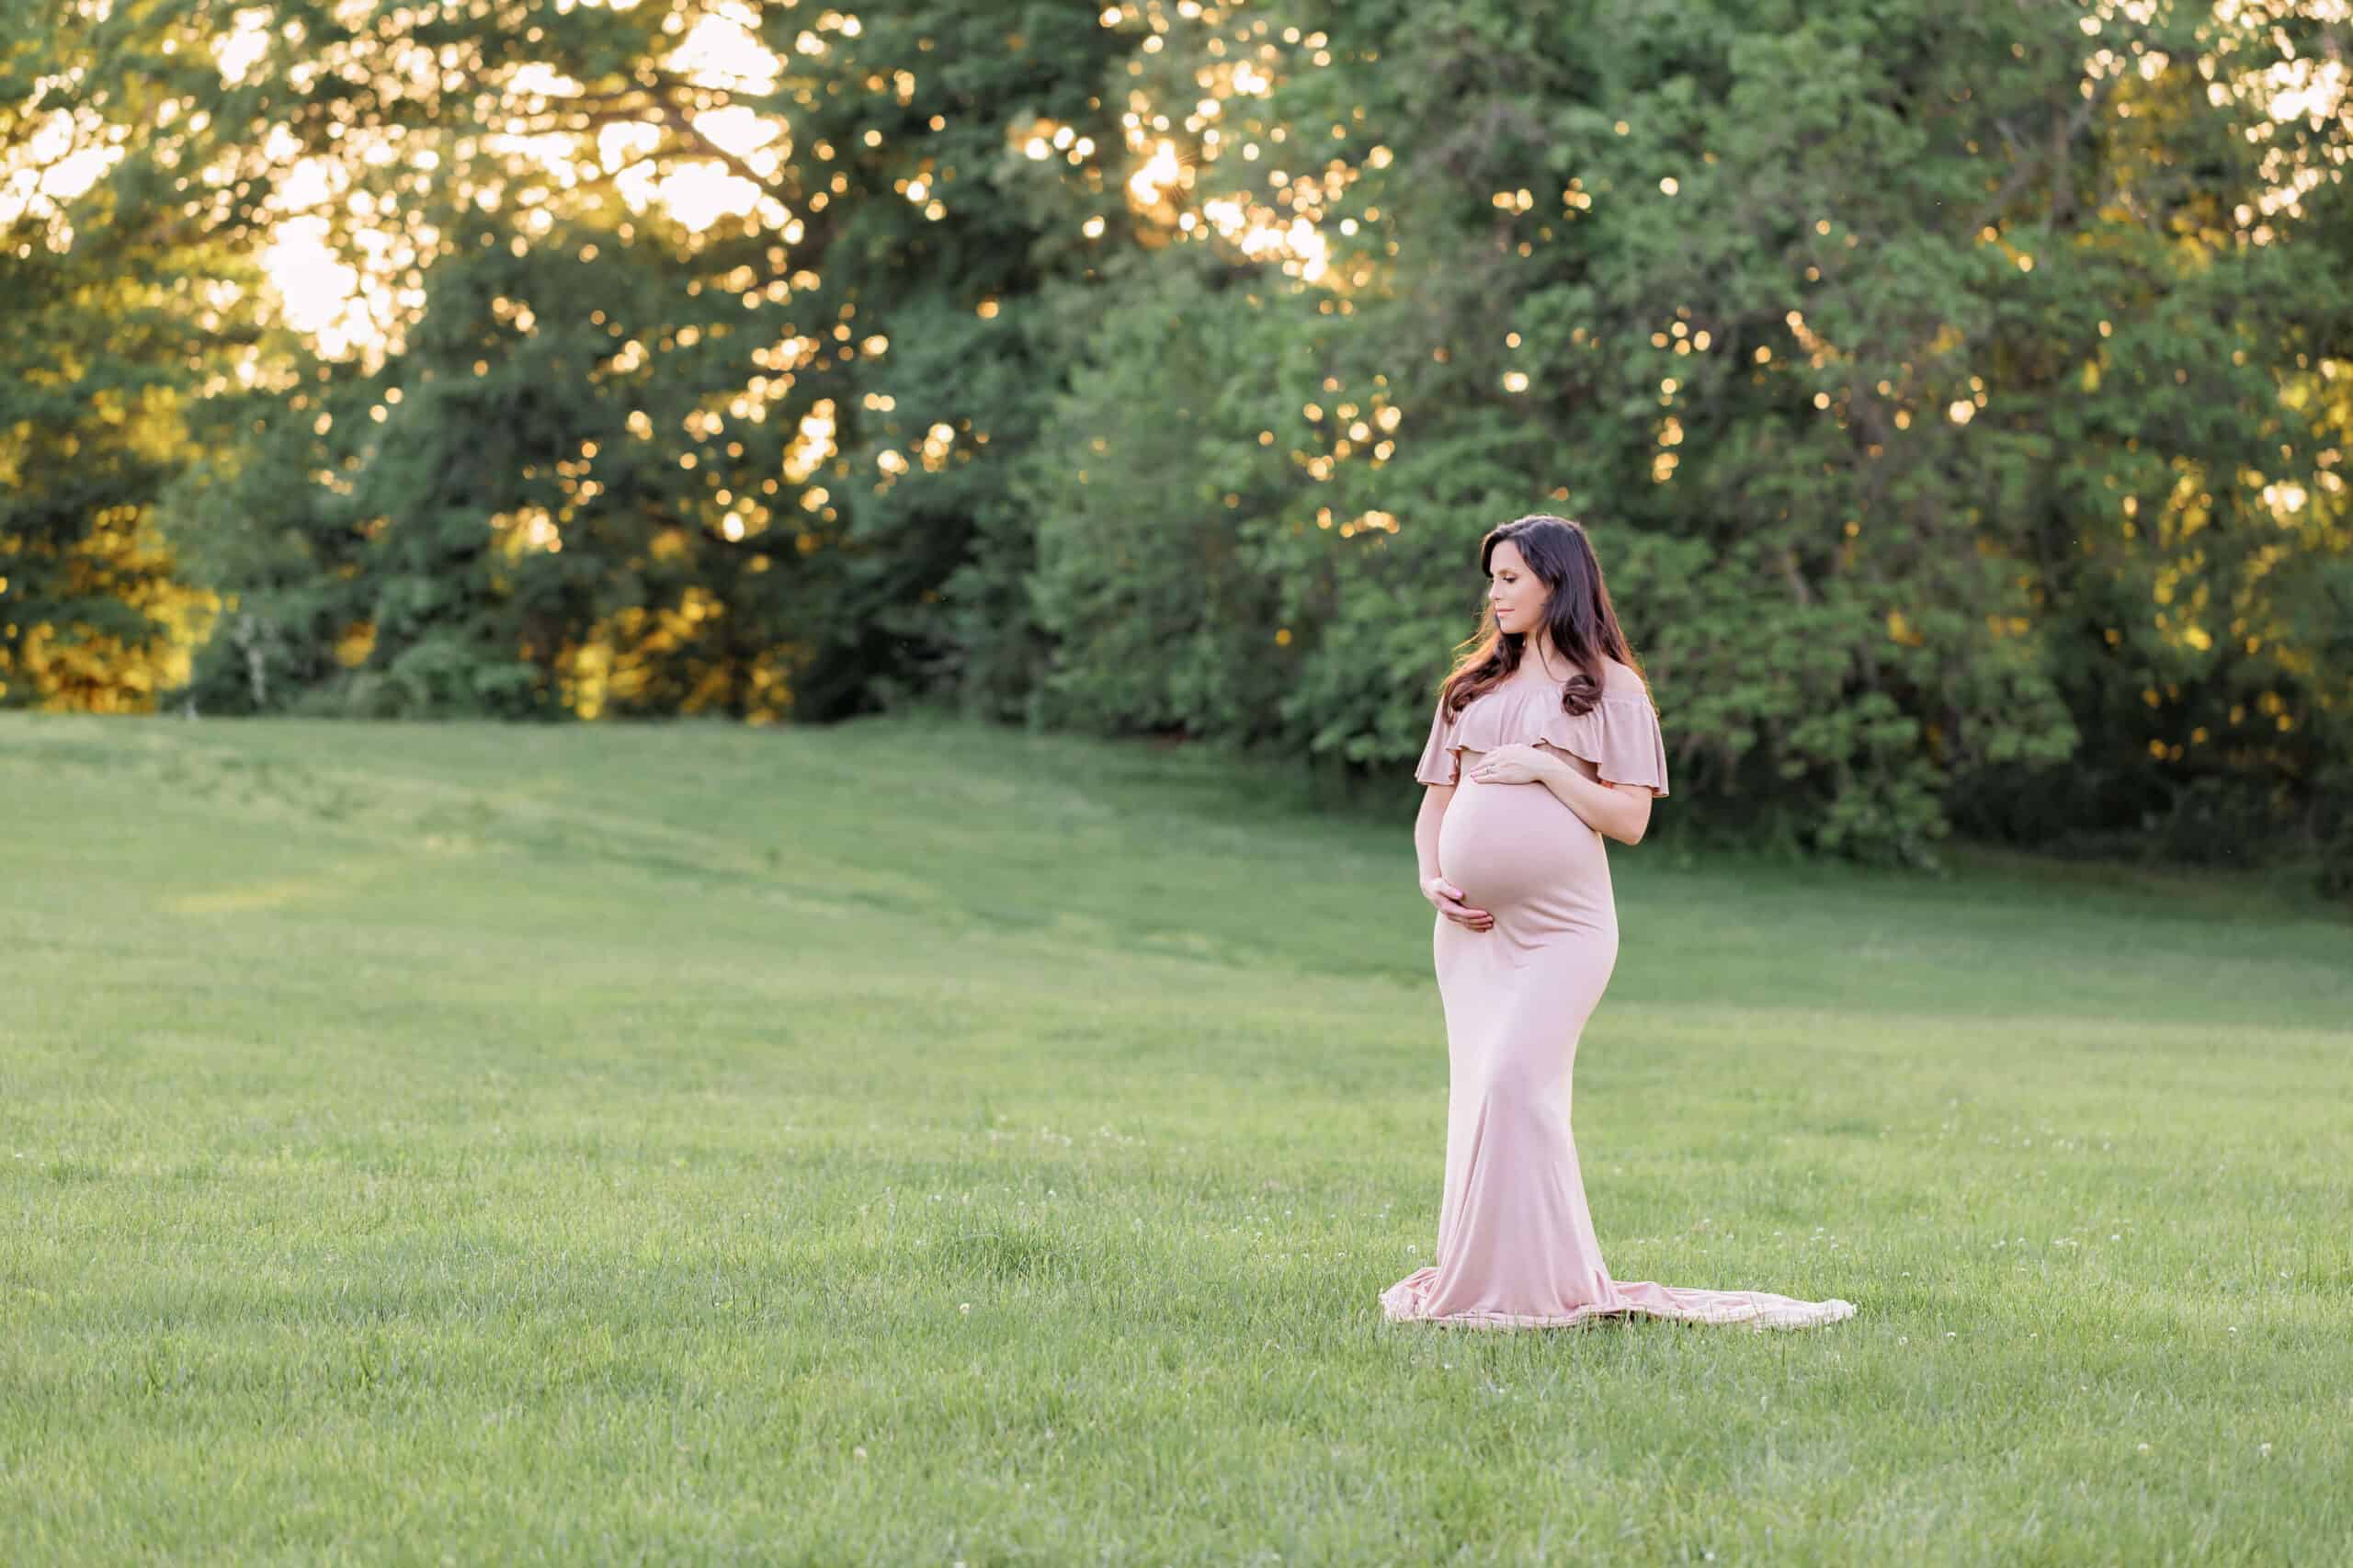 A blog about prenatal chiropractors in Northern Virginia featuring a photo of a mother-to-be in a tan dress standing in a field at sunset.